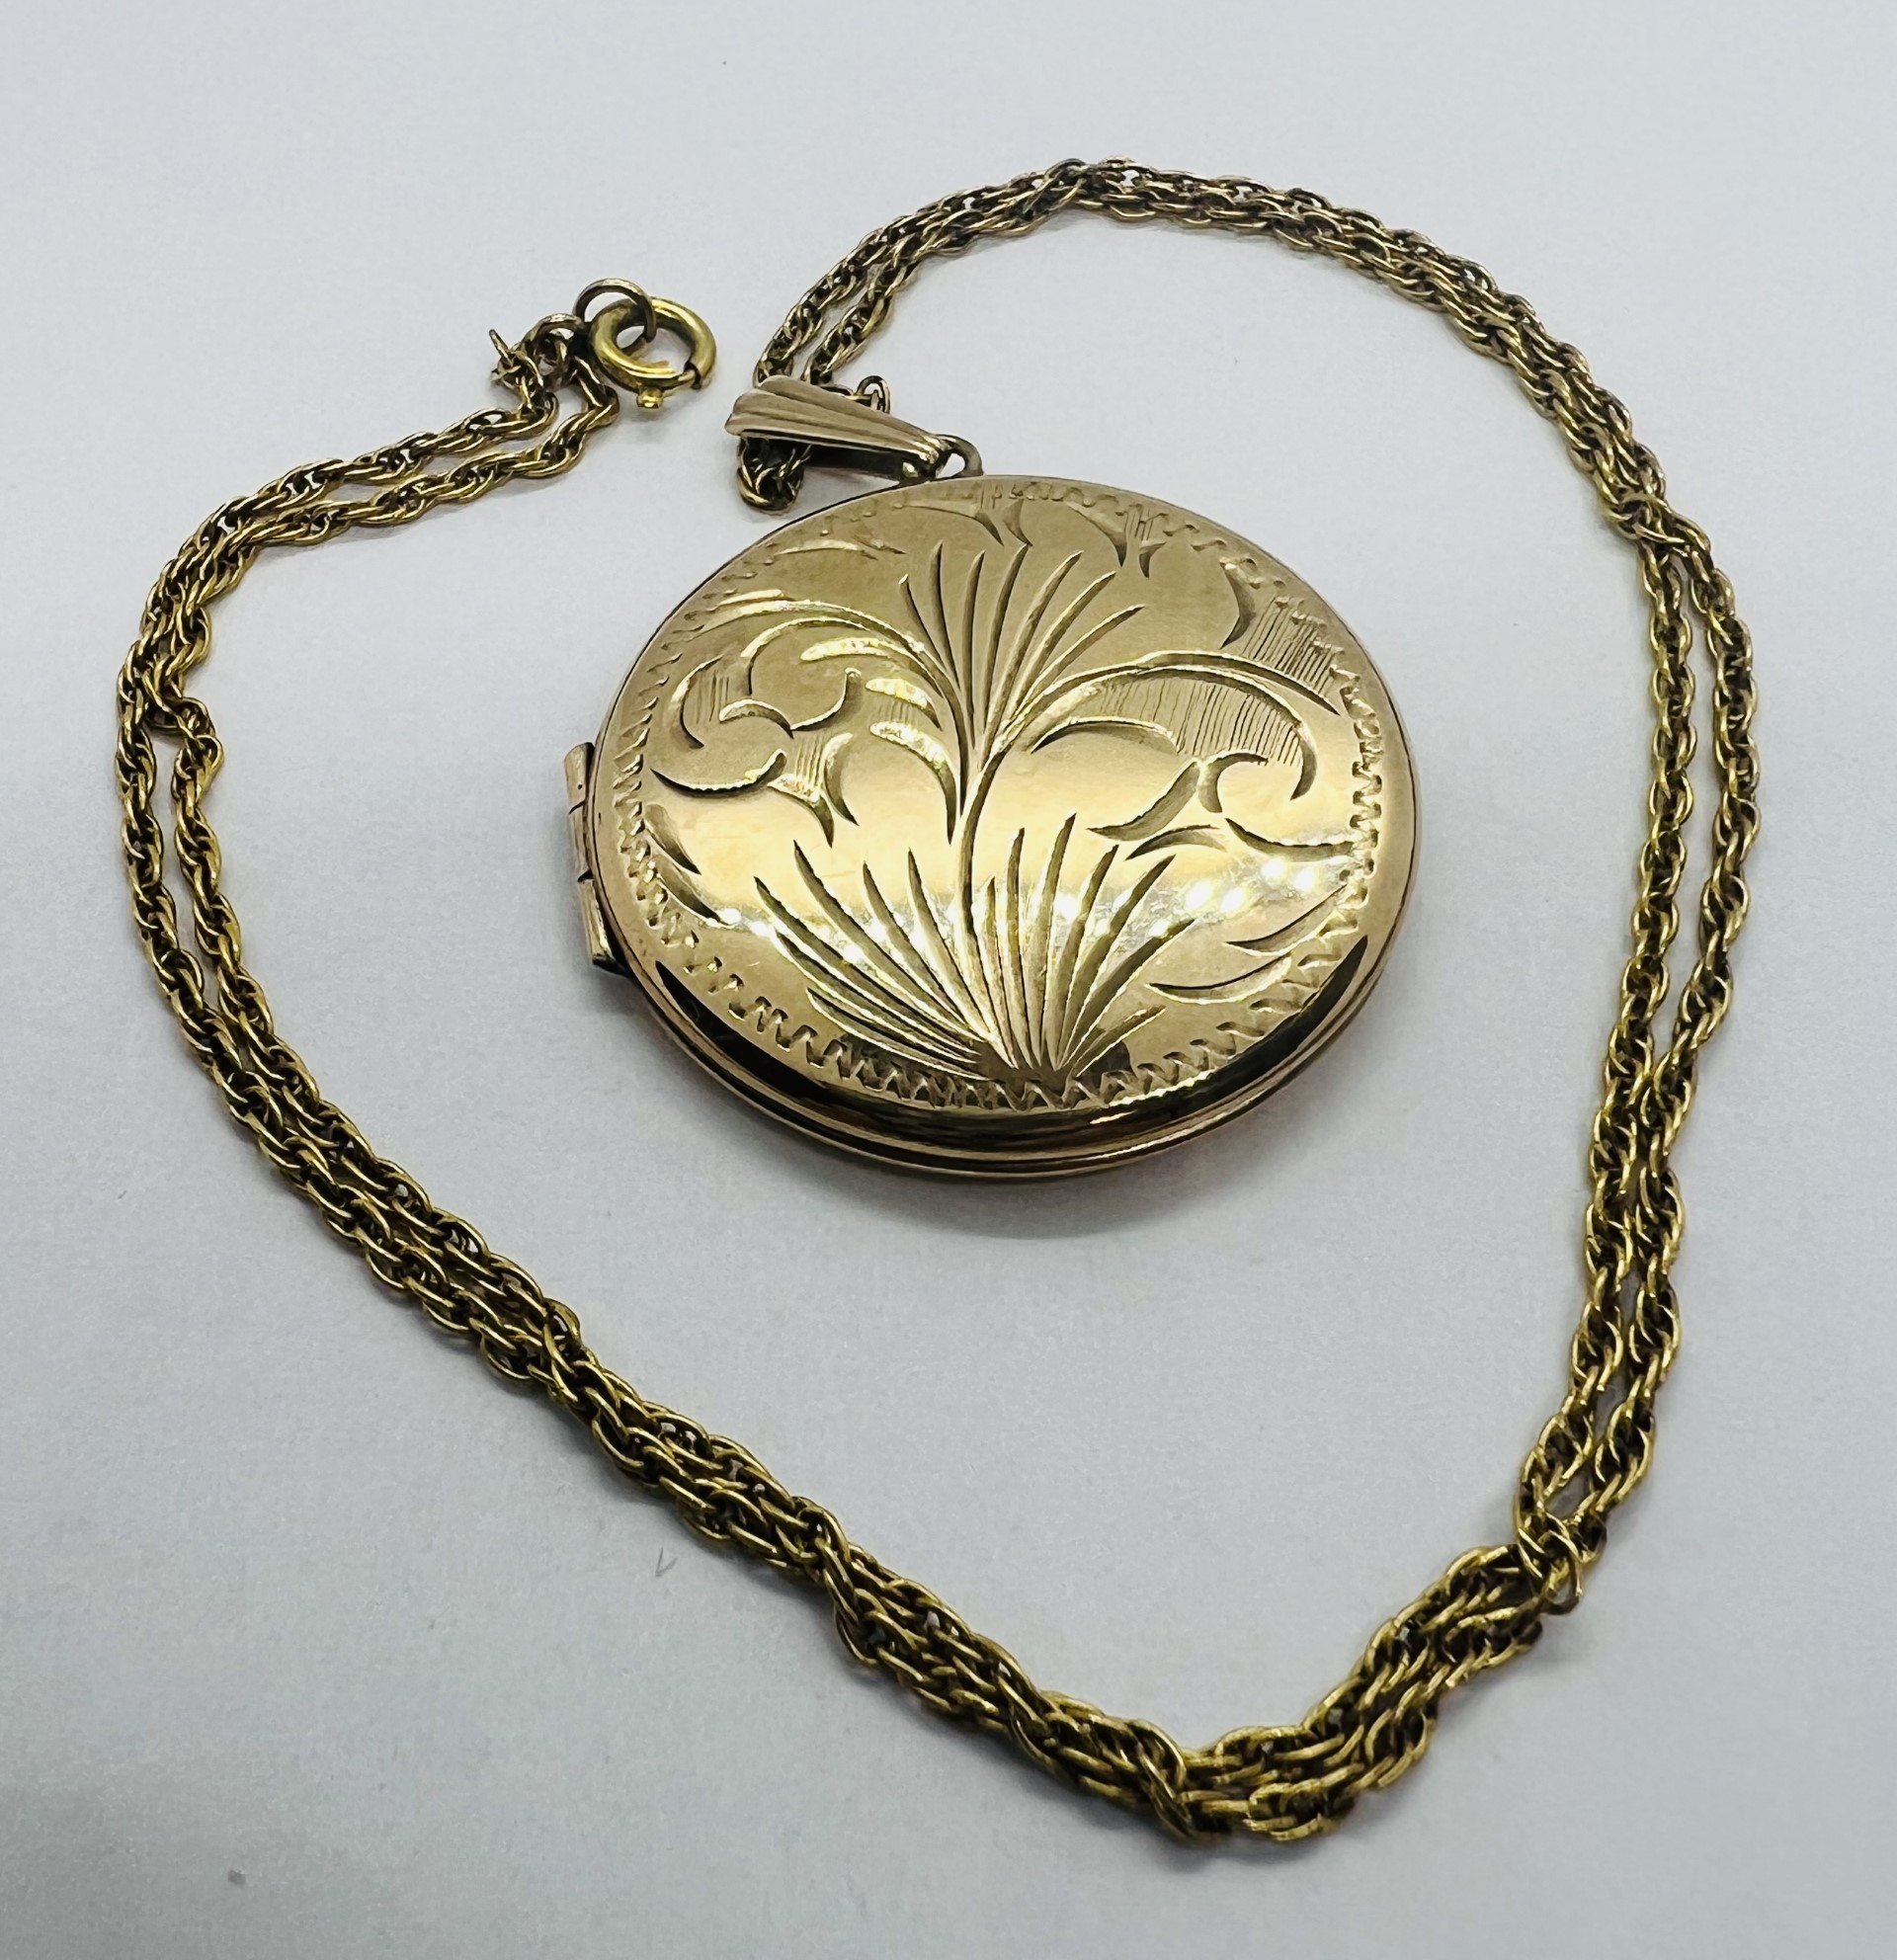 A 9ct circular locket with foliate engraving on a "9ct" stamped chain. Gross approximate weight 9.